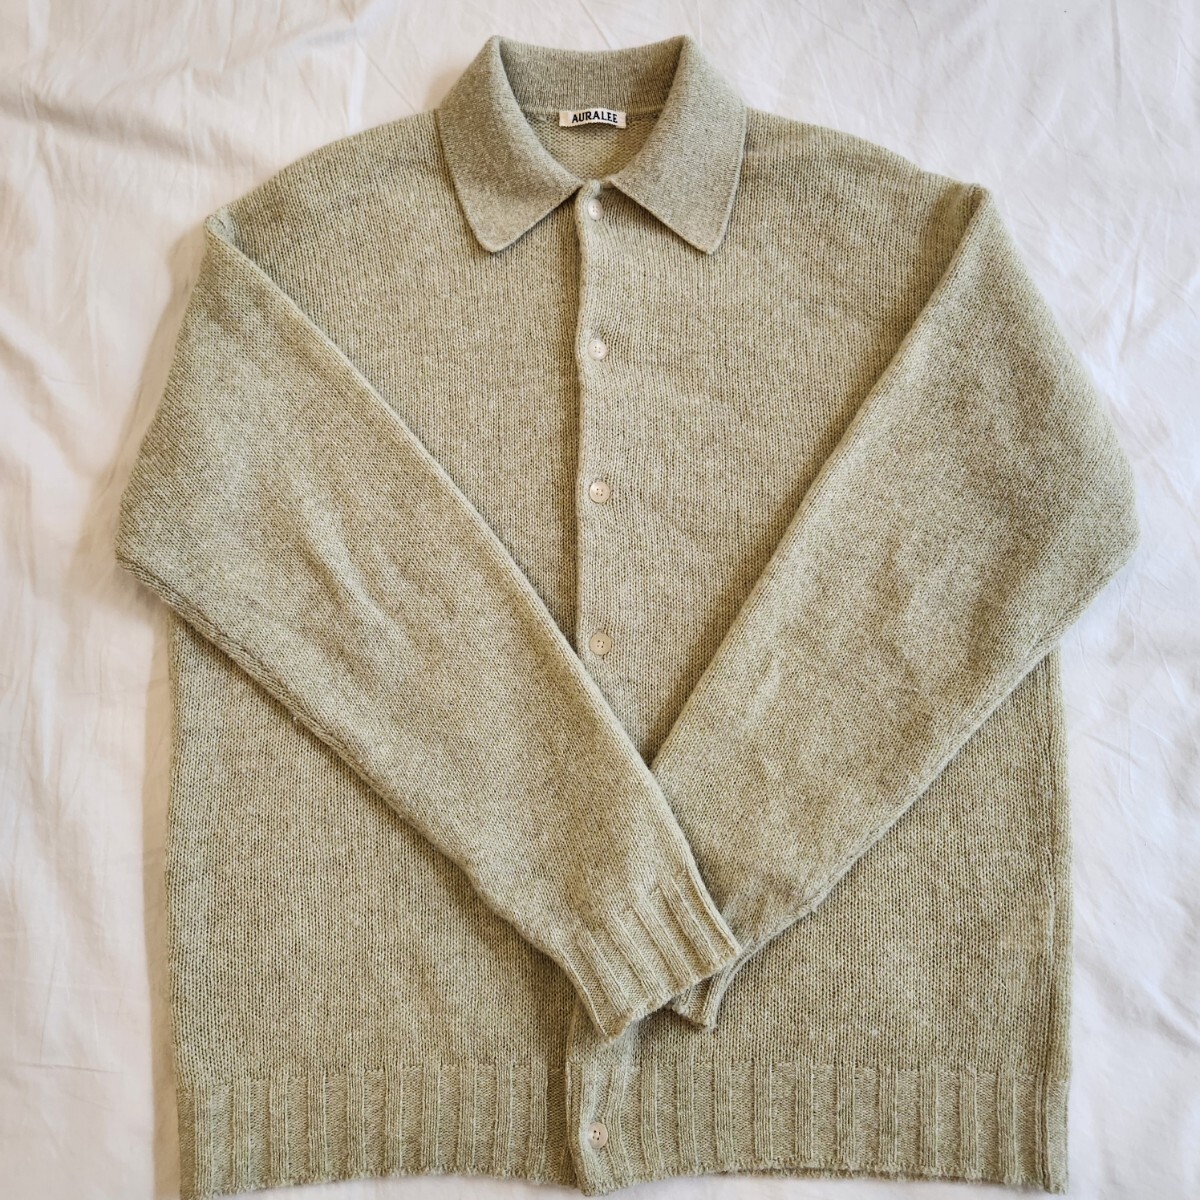 AURALEEo- Rally 23AW SHETLAND WOOL CASHMERE KNIT CARDIGAN SIZE 5 A23AC01SCsheto Land cashmere knitted cardigan 